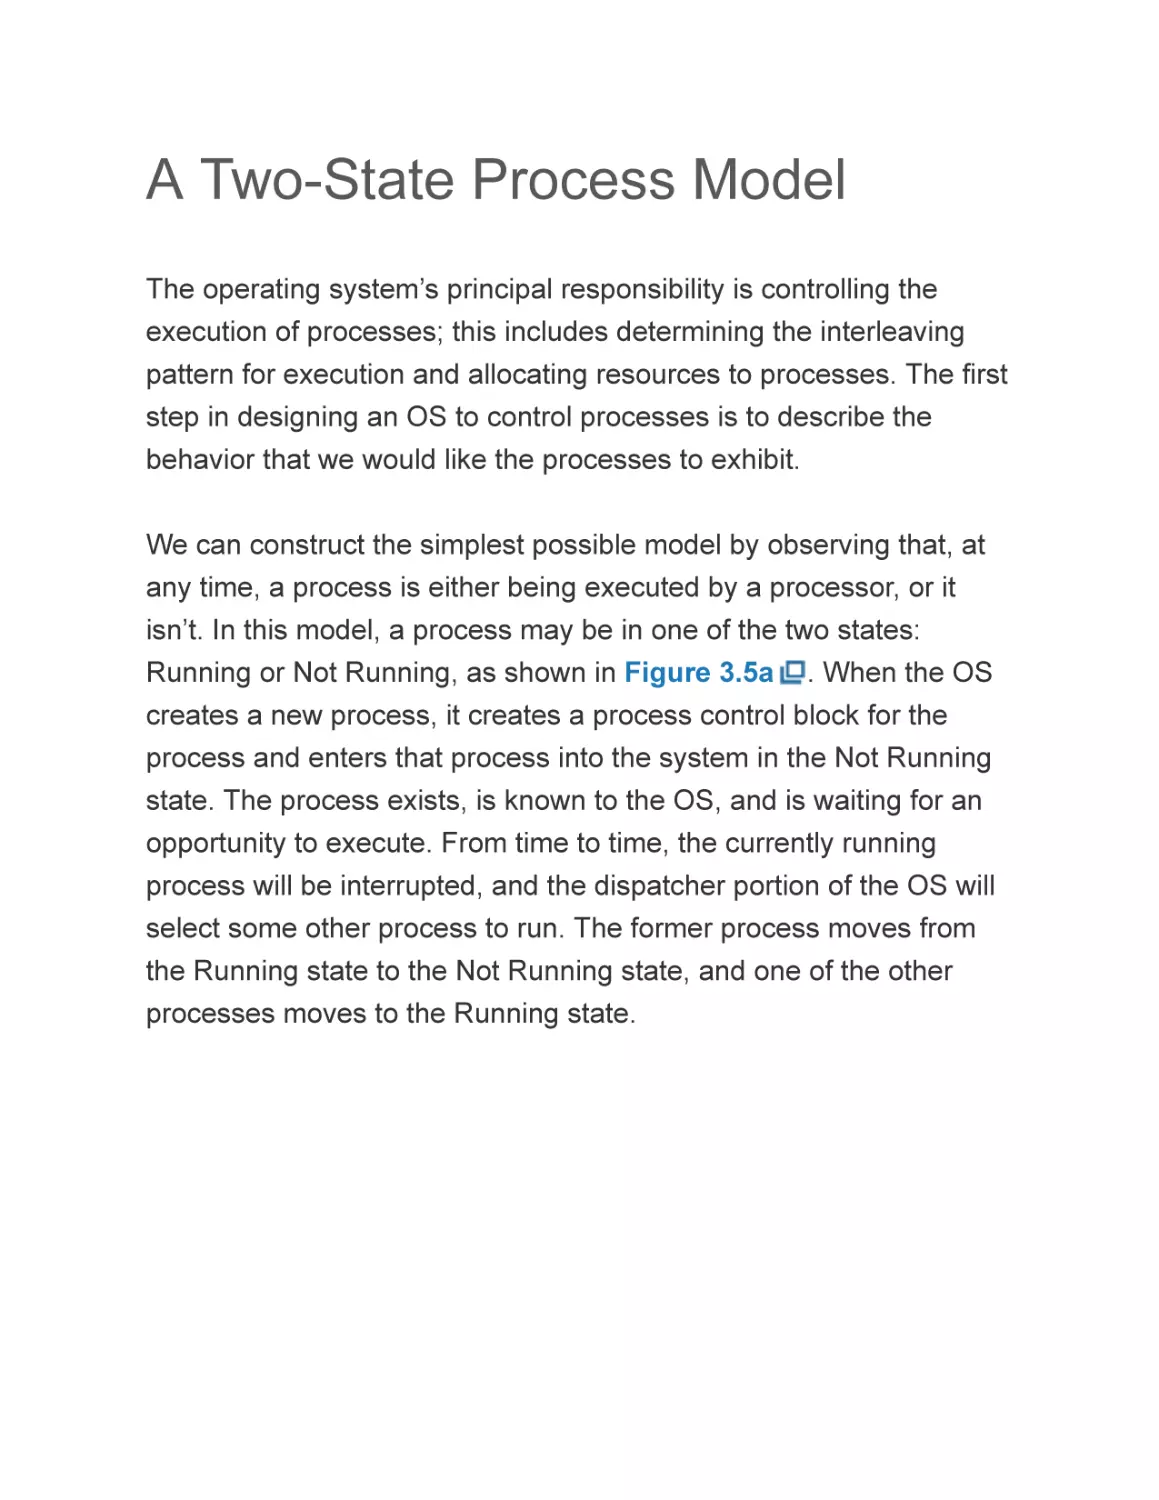 A Two-State Process Model